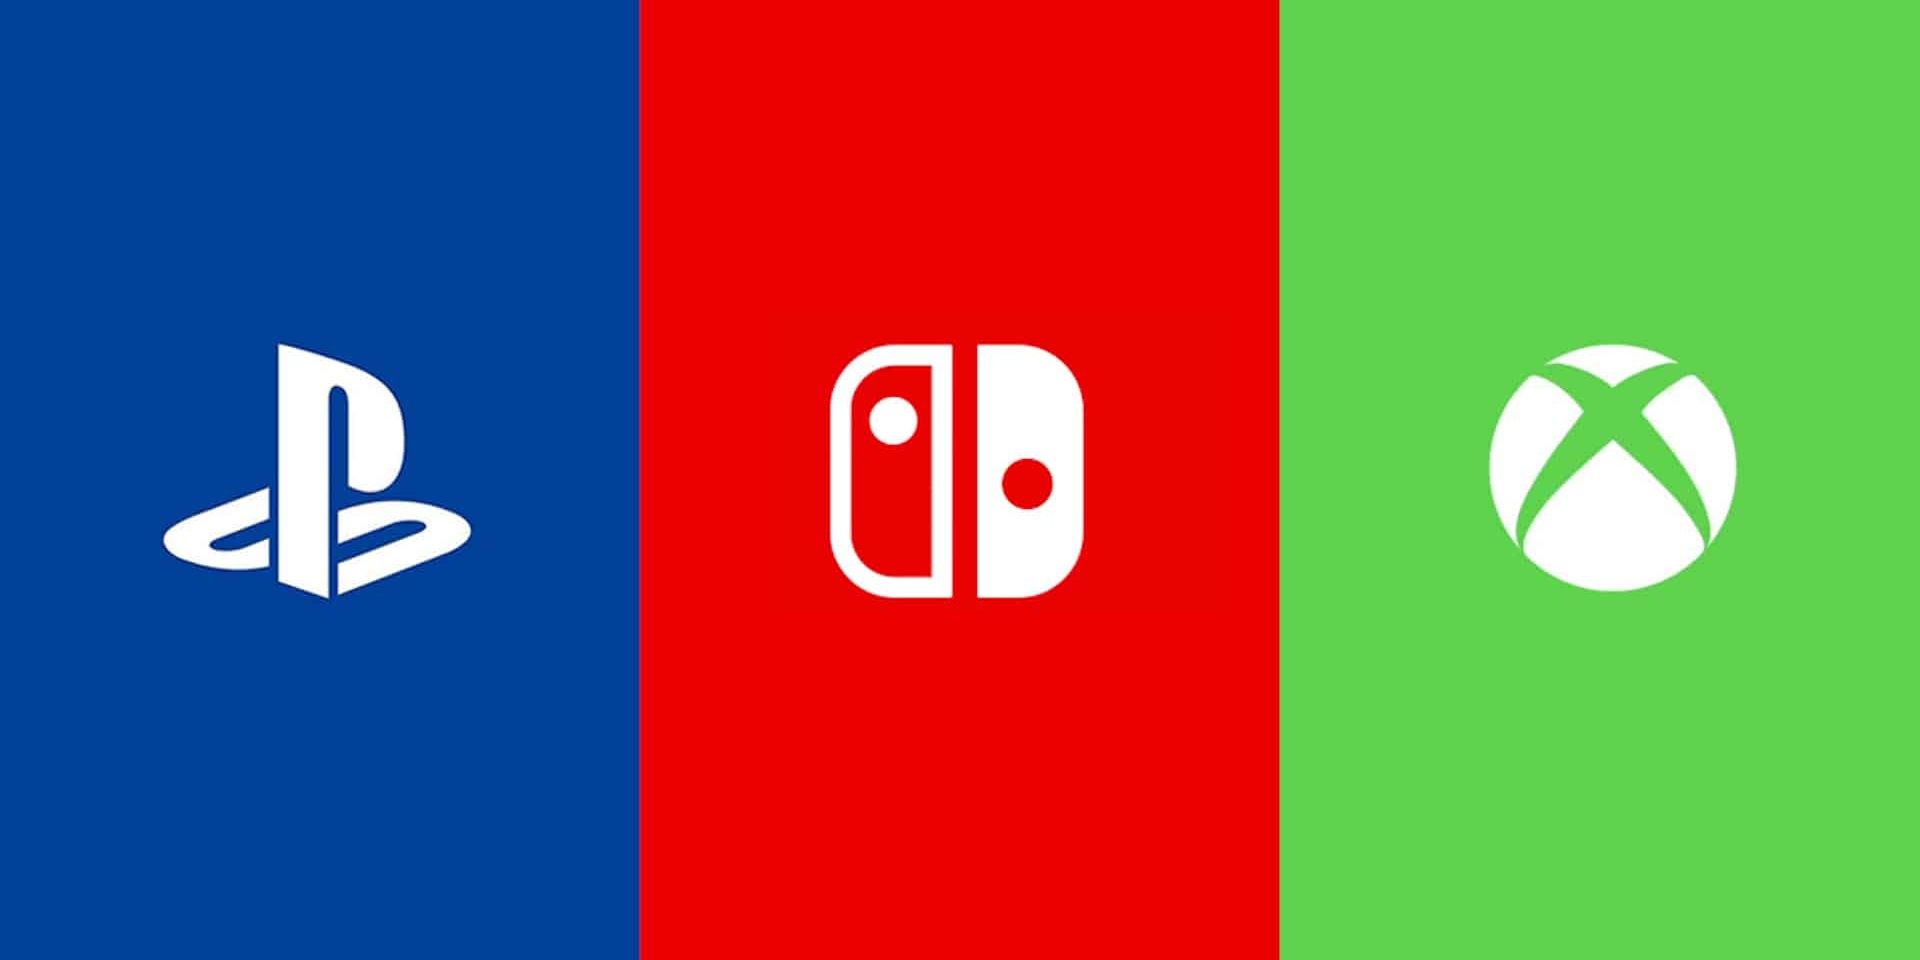 Cross Platform Symbol With PlayStation Switch and Xbox Logos